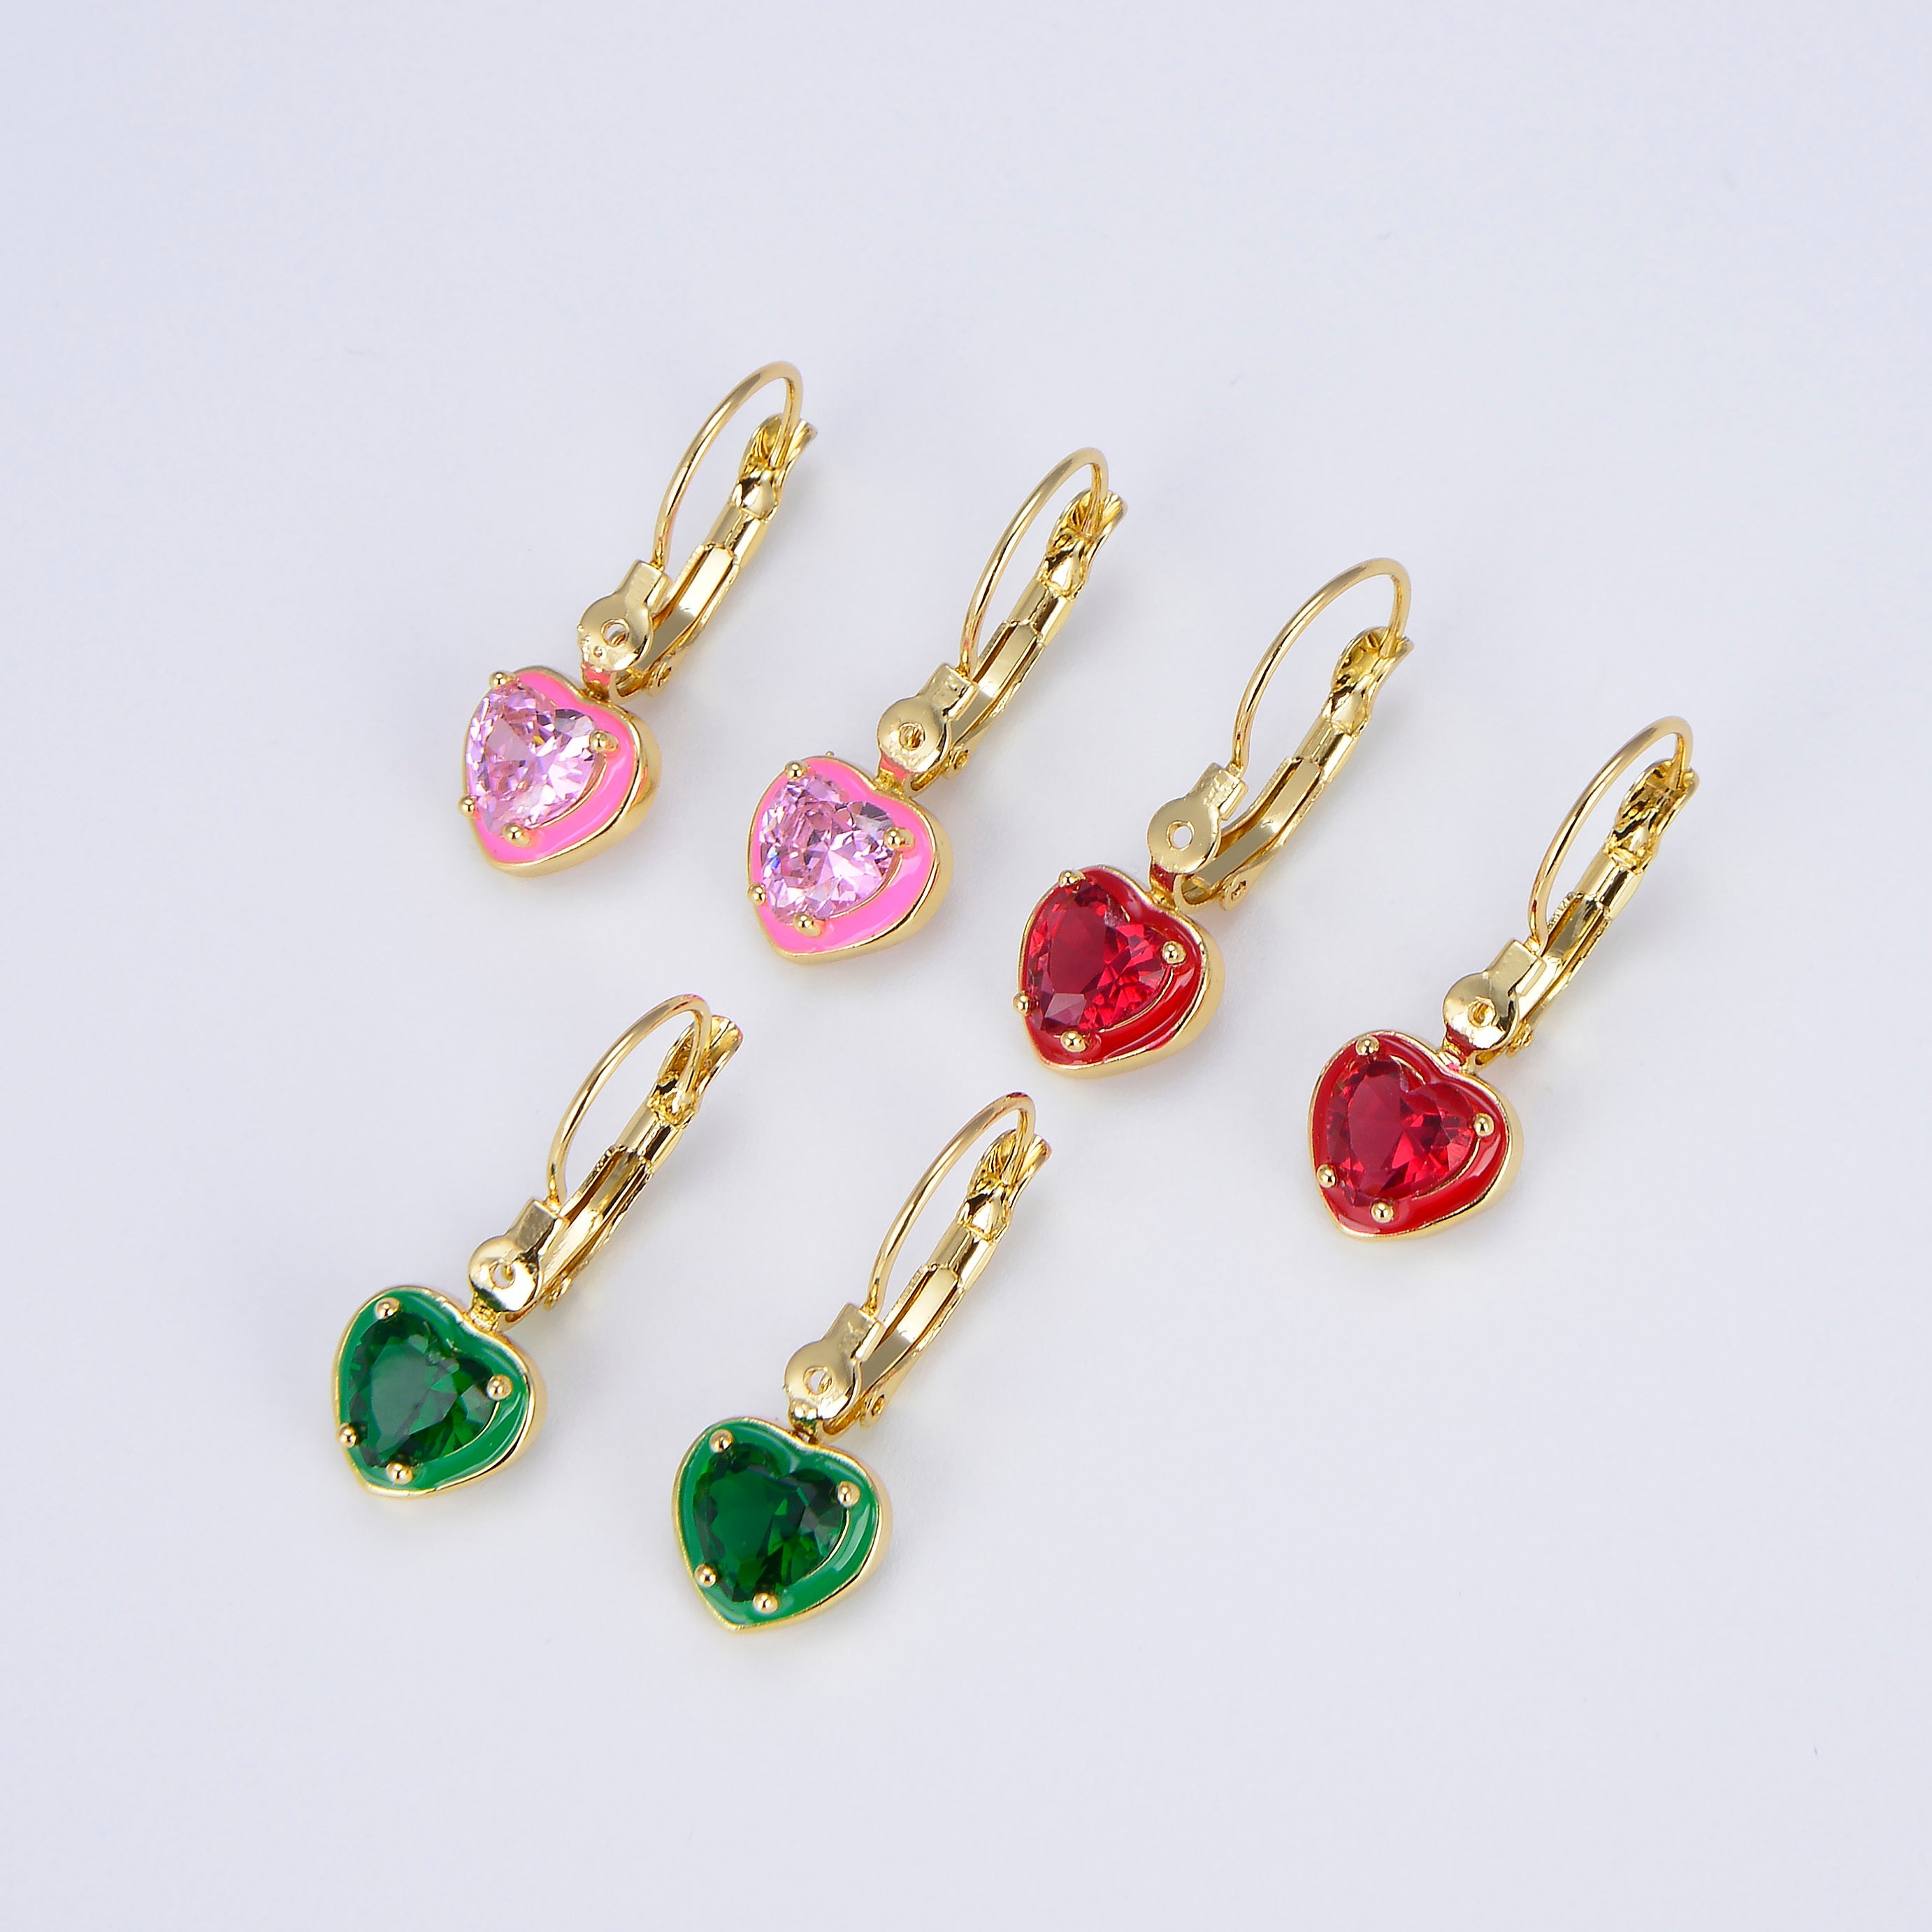 1pair Women Heart Crystals Earrings Drop Dangle Lever Back Hoop Earrings for Girl Green Red Pink Cubic Stone for everyday Wear P105 - DLUXCA